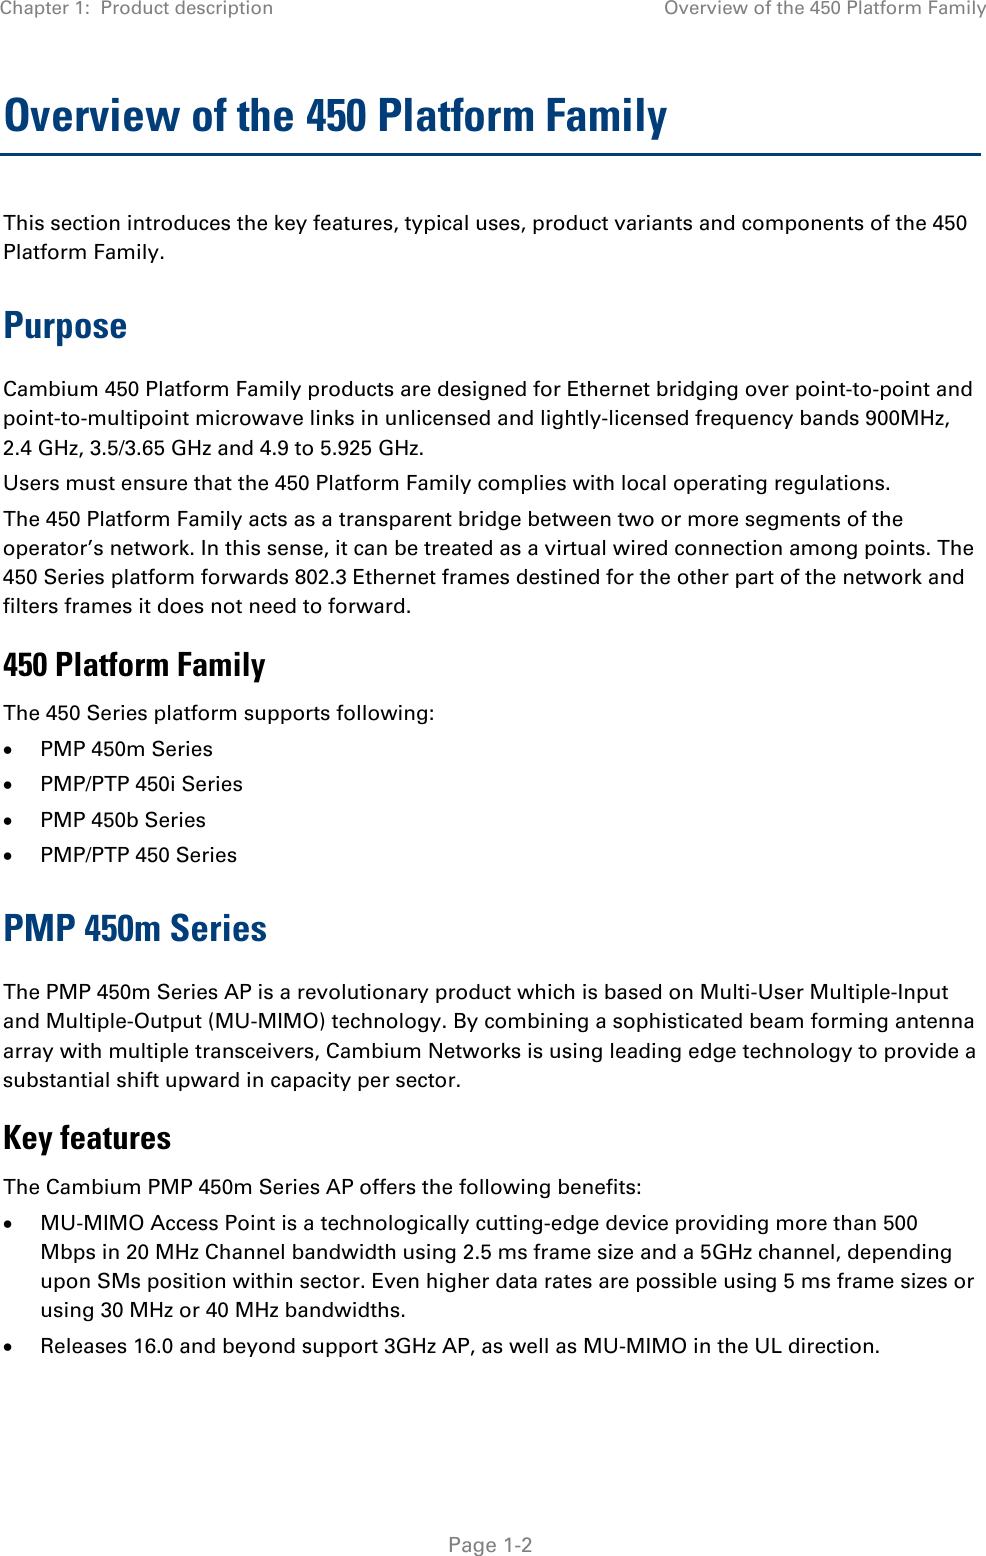 Chapter 1:  Product description Overview of the 450 Platform Family   Page 1-2 Overview of the 450 Platform Family  This section introduces the key features, typical uses, product variants and components of the 450 Platform Family. Purpose Cambium 450 Platform Family products are designed for Ethernet bridging over point-to-point and point-to-multipoint microwave links in unlicensed and lightly-licensed frequency bands 900MHz, 2.4 GHz, 3.5/3.65 GHz and 4.9 to 5.925 GHz. Users must ensure that the 450 Platform Family complies with local operating regulations. The 450 Platform Family acts as a transparent bridge between two or more segments of the operator’s network. In this sense, it can be treated as a virtual wired connection among points. The 450 Series platform forwards 802.3 Ethernet frames destined for the other part of the network and filters frames it does not need to forward.  450 Platform Family The 450 Series platform supports following: • PMP 450m Series • PMP/PTP 450i Series • PMP 450b Series  • PMP/PTP 450 Series PMP 450m Series The PMP 450m Series AP is a revolutionary product which is based on Multi-User Multiple-Input and Multiple-Output (MU-MIMO) technology. By combining a sophisticated beam forming antenna array with multiple transceivers, Cambium Networks is using leading edge technology to provide a substantial shift upward in capacity per sector. Key features   The Cambium PMP 450m Series AP offers the following benefits: • MU-MIMO Access Point is a technologically cutting-edge device providing more than 500 Mbps in 20 MHz Channel bandwidth using 2.5 ms frame size and a 5GHz channel, depending upon SMs position within sector. Even higher data rates are possible using 5 ms frame sizes or using 30 MHz or 40 MHz bandwidths. • Releases 16.0 and beyond support 3GHz AP, as well as MU-MIMO in the UL direction. 